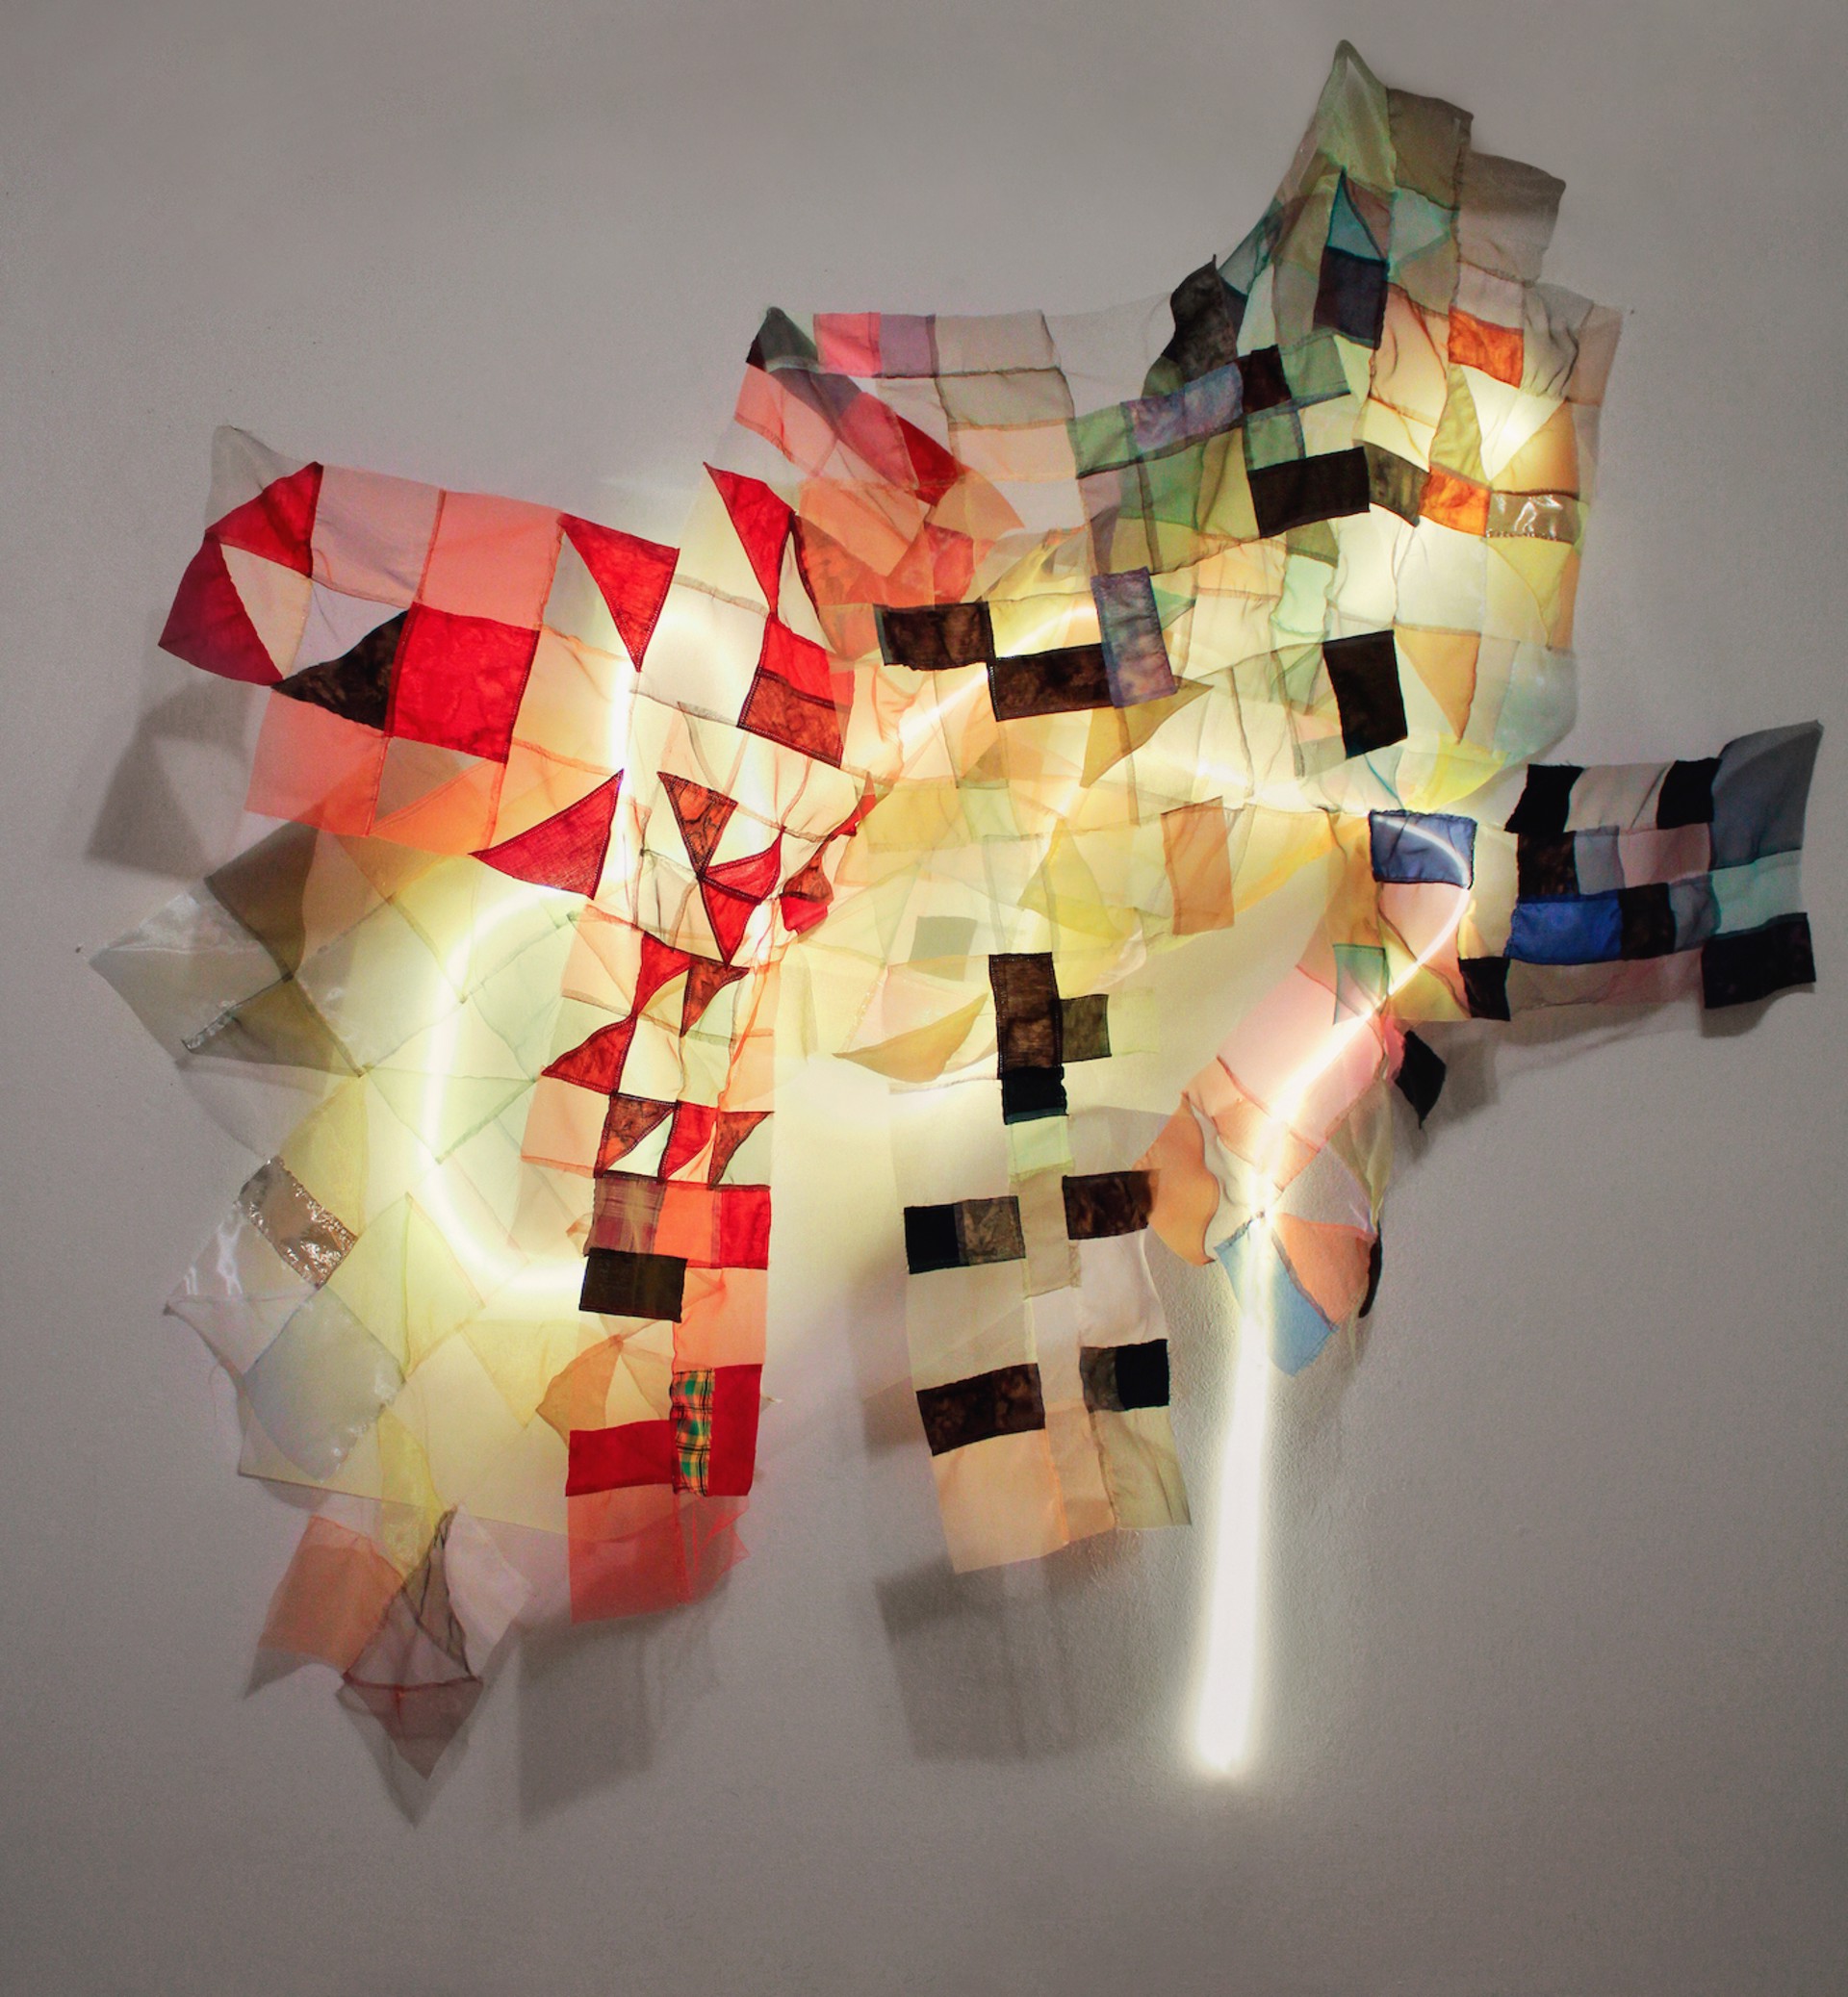 Quilt Suspension 2 by Holly Wong